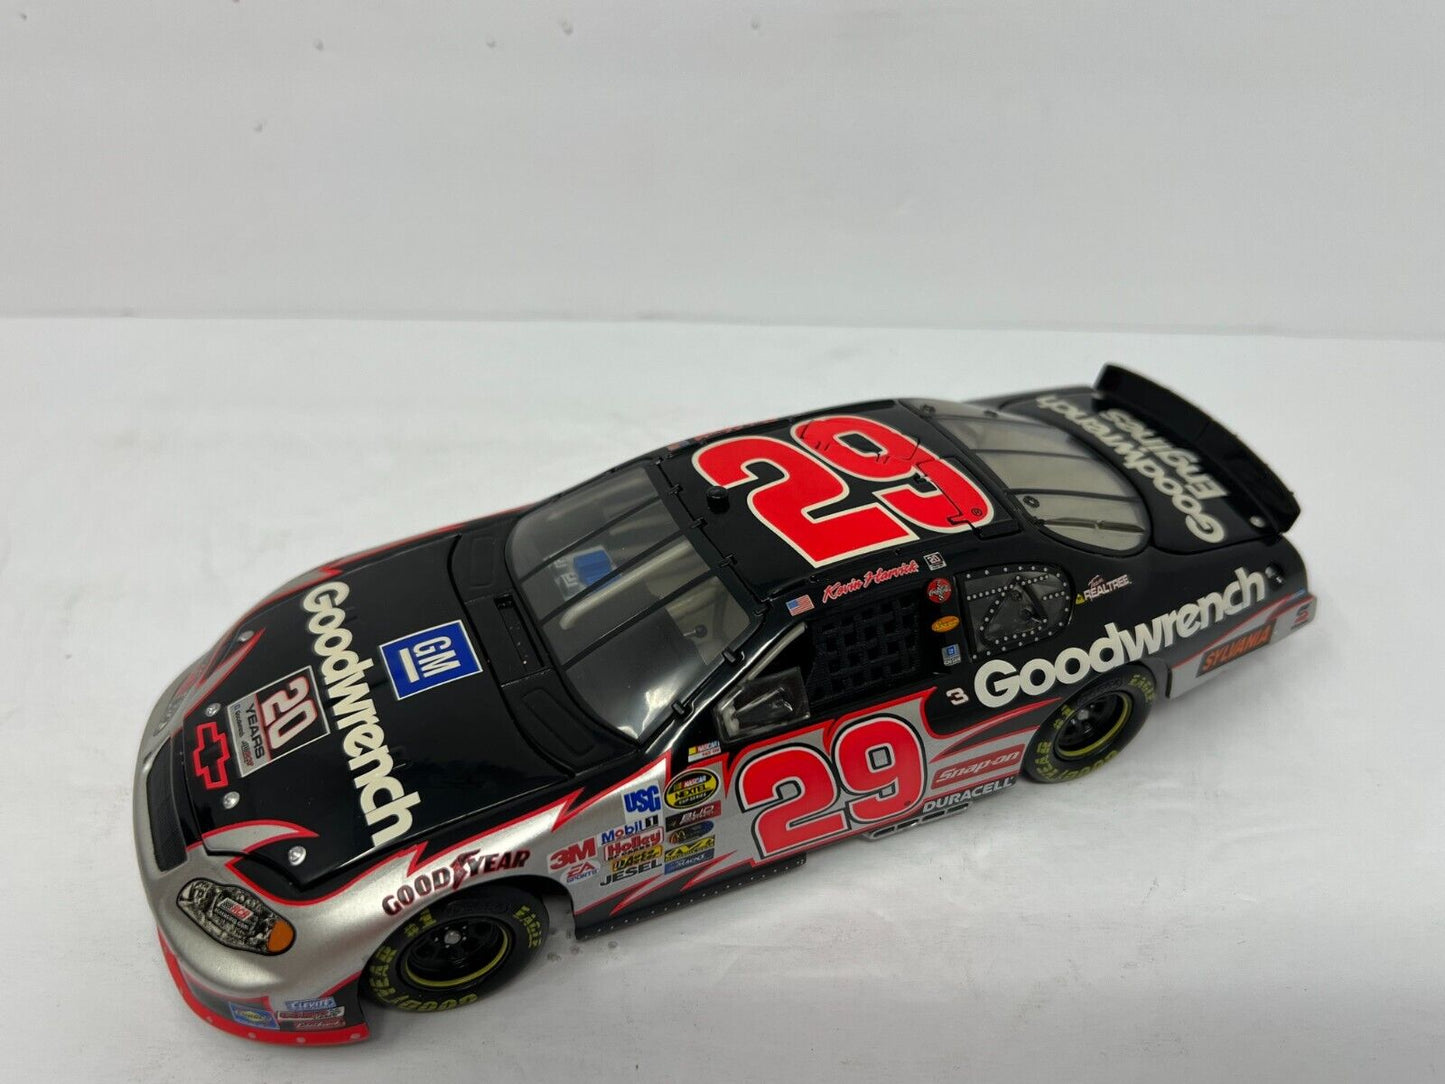 Action Nascar #29 Kevin Harvick Goodwrench GM Dealers (1 of 2,700#) 1:24 Diecast